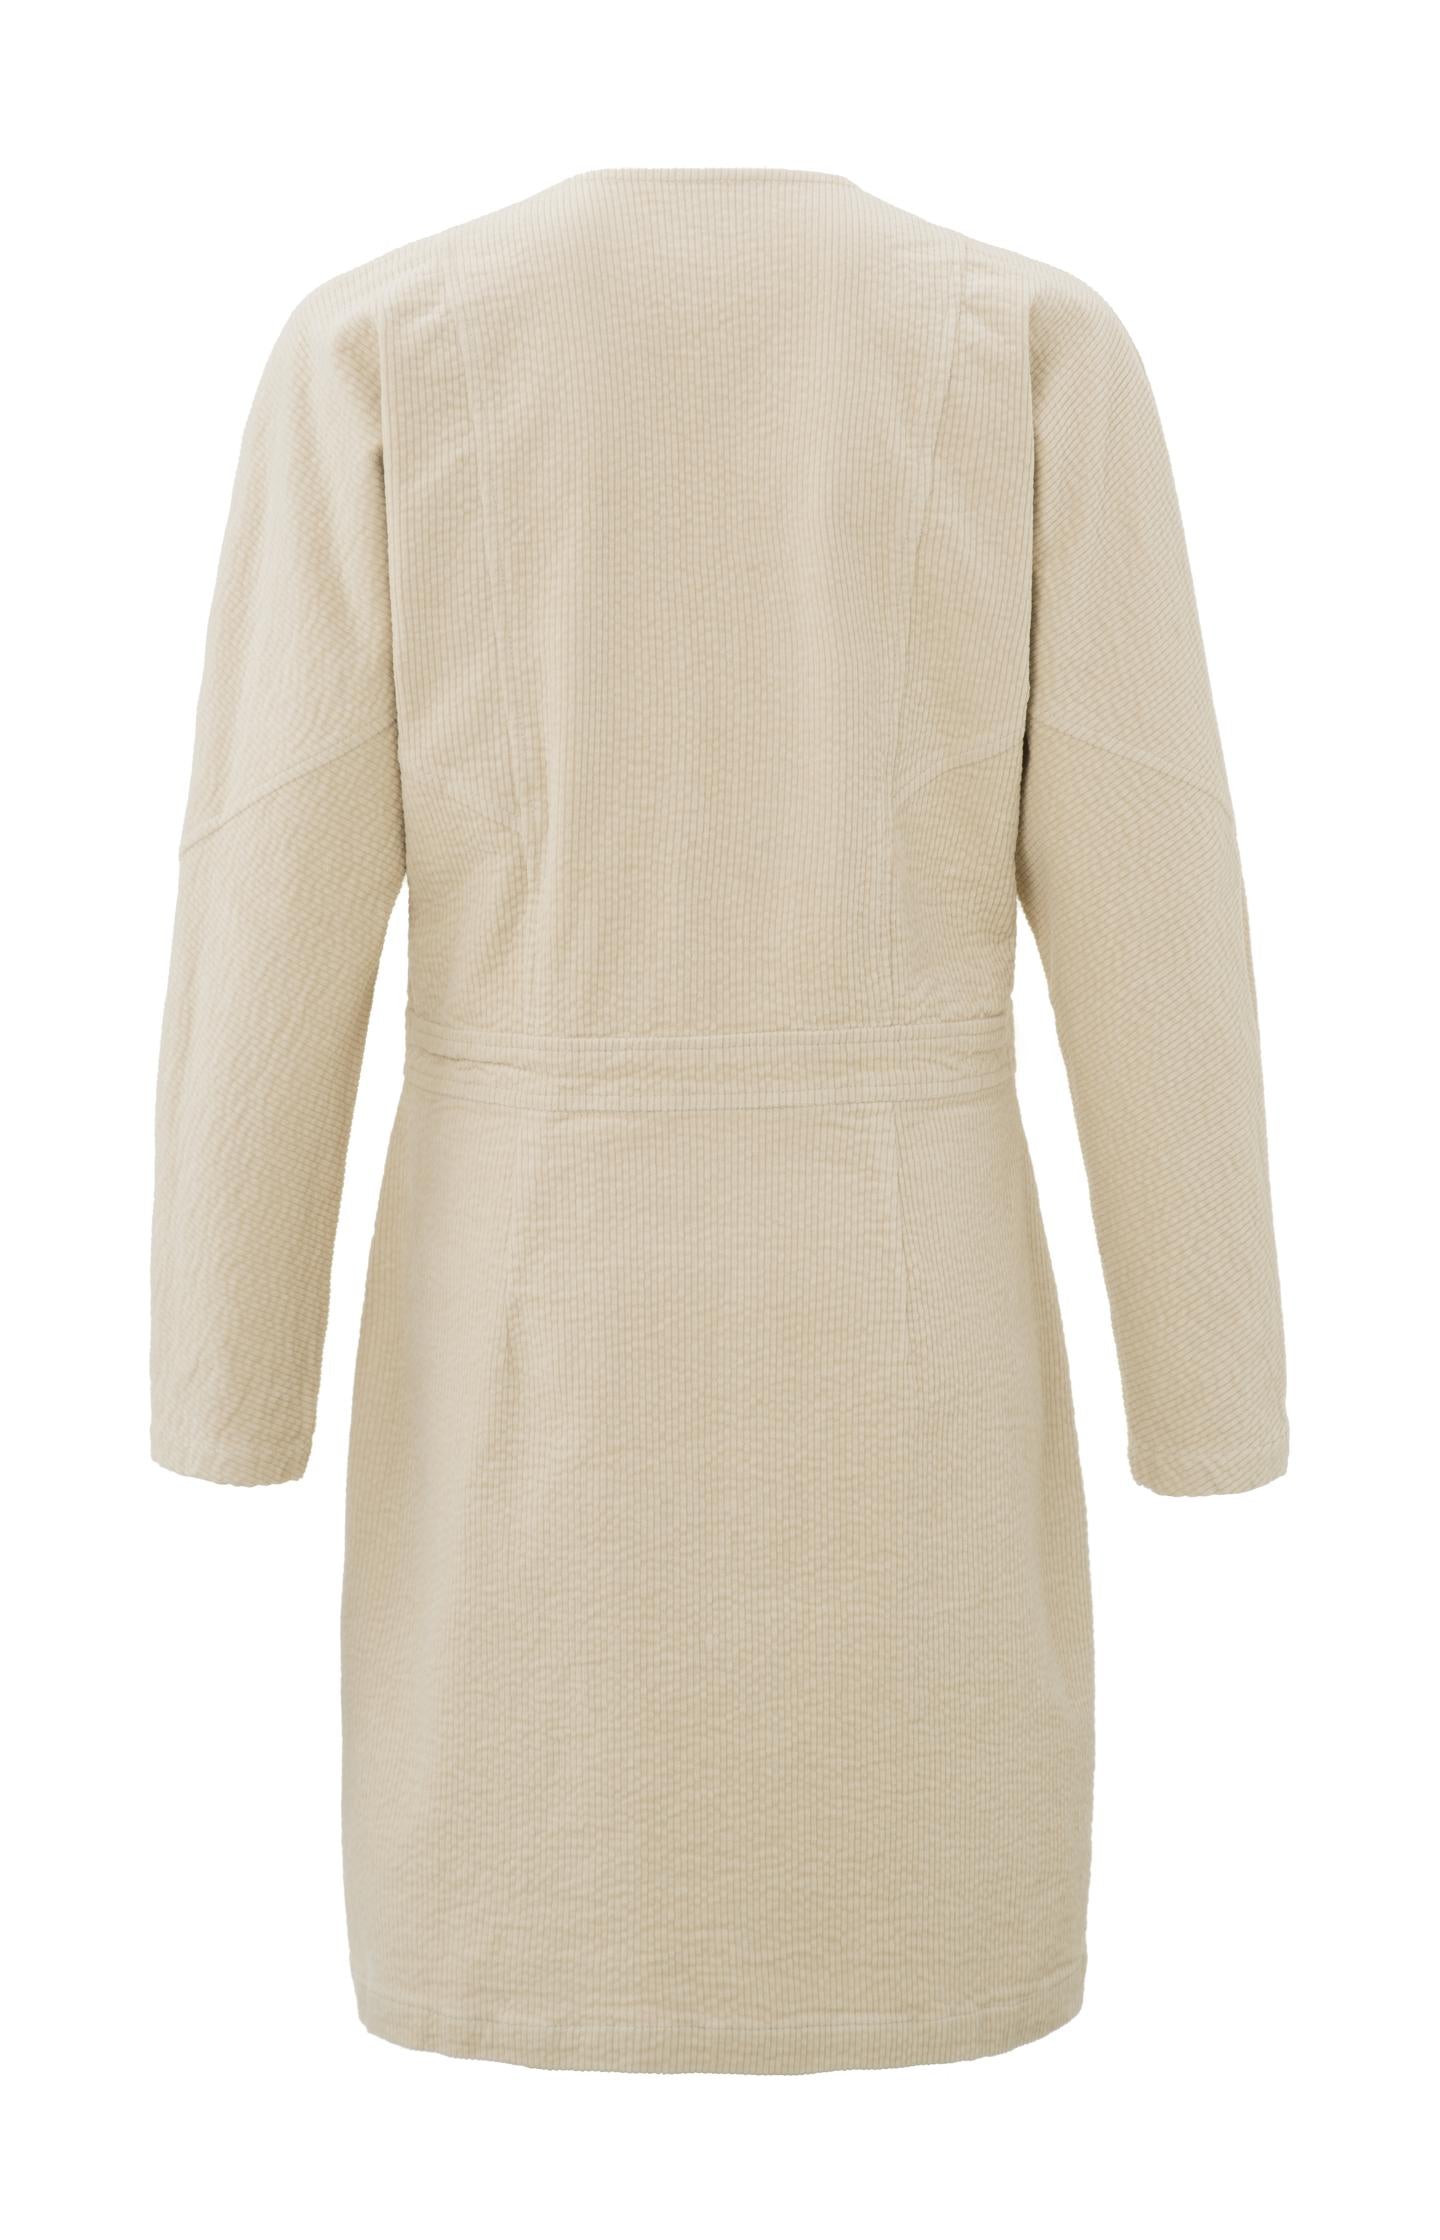 Wrap dress with V-neck, long sleeves and seam details